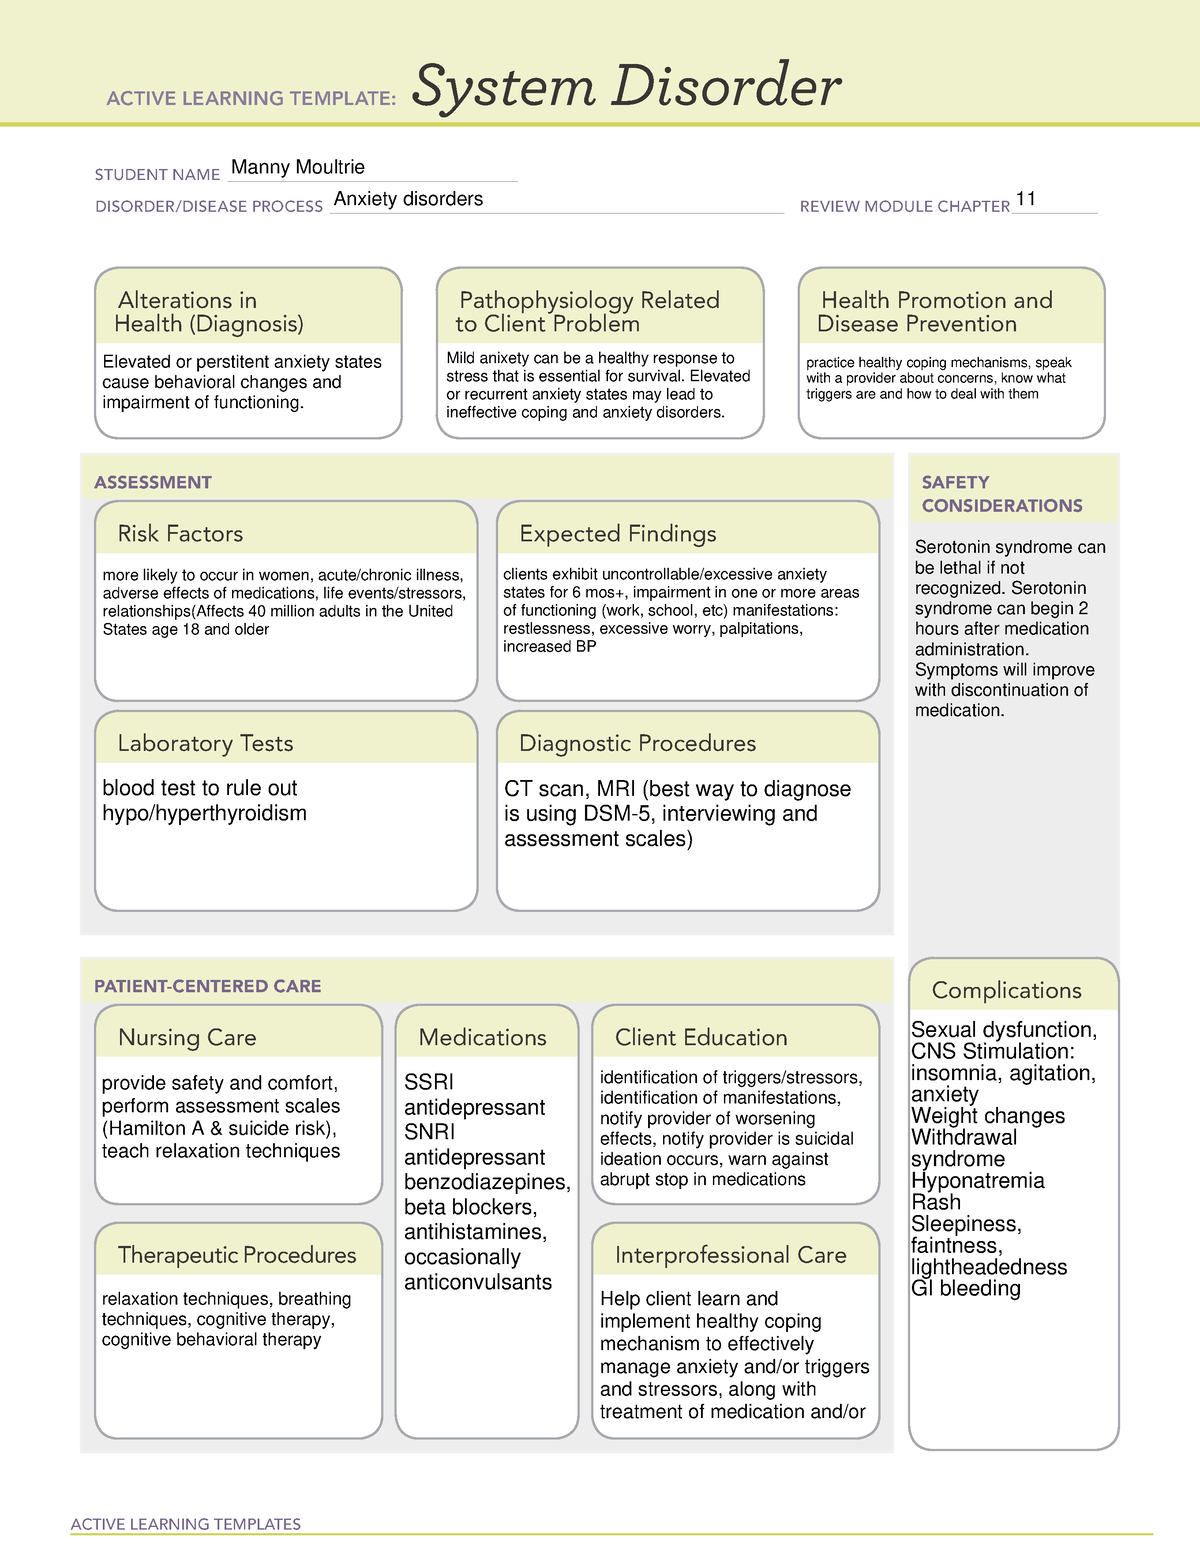 Anxiety System Disorder ATI Template - ACTIVE LEARNING TEMPLATES System ...